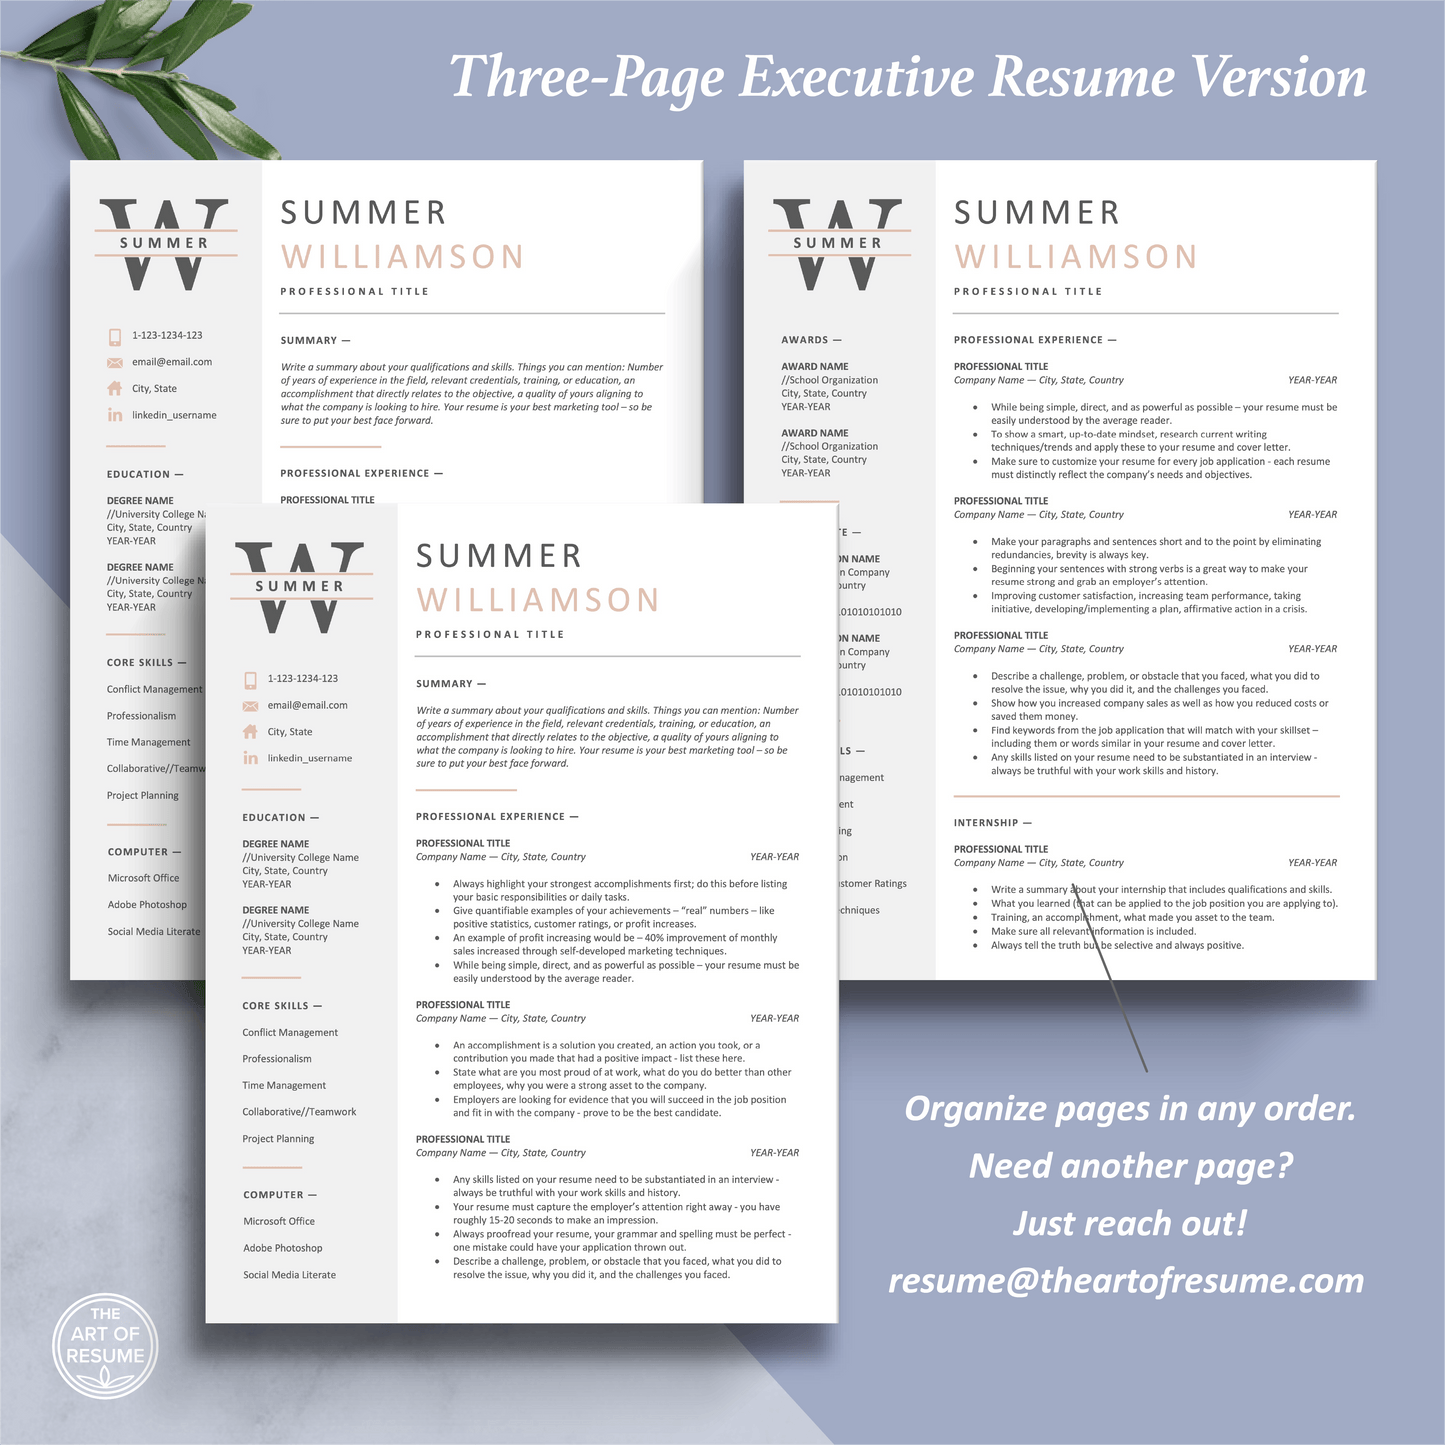 The Art of Resume Templates | Three-Page Professional Pink and Grey Executive CEO C-Suite Level  Resume CV Template Format | Curriculum Vitae